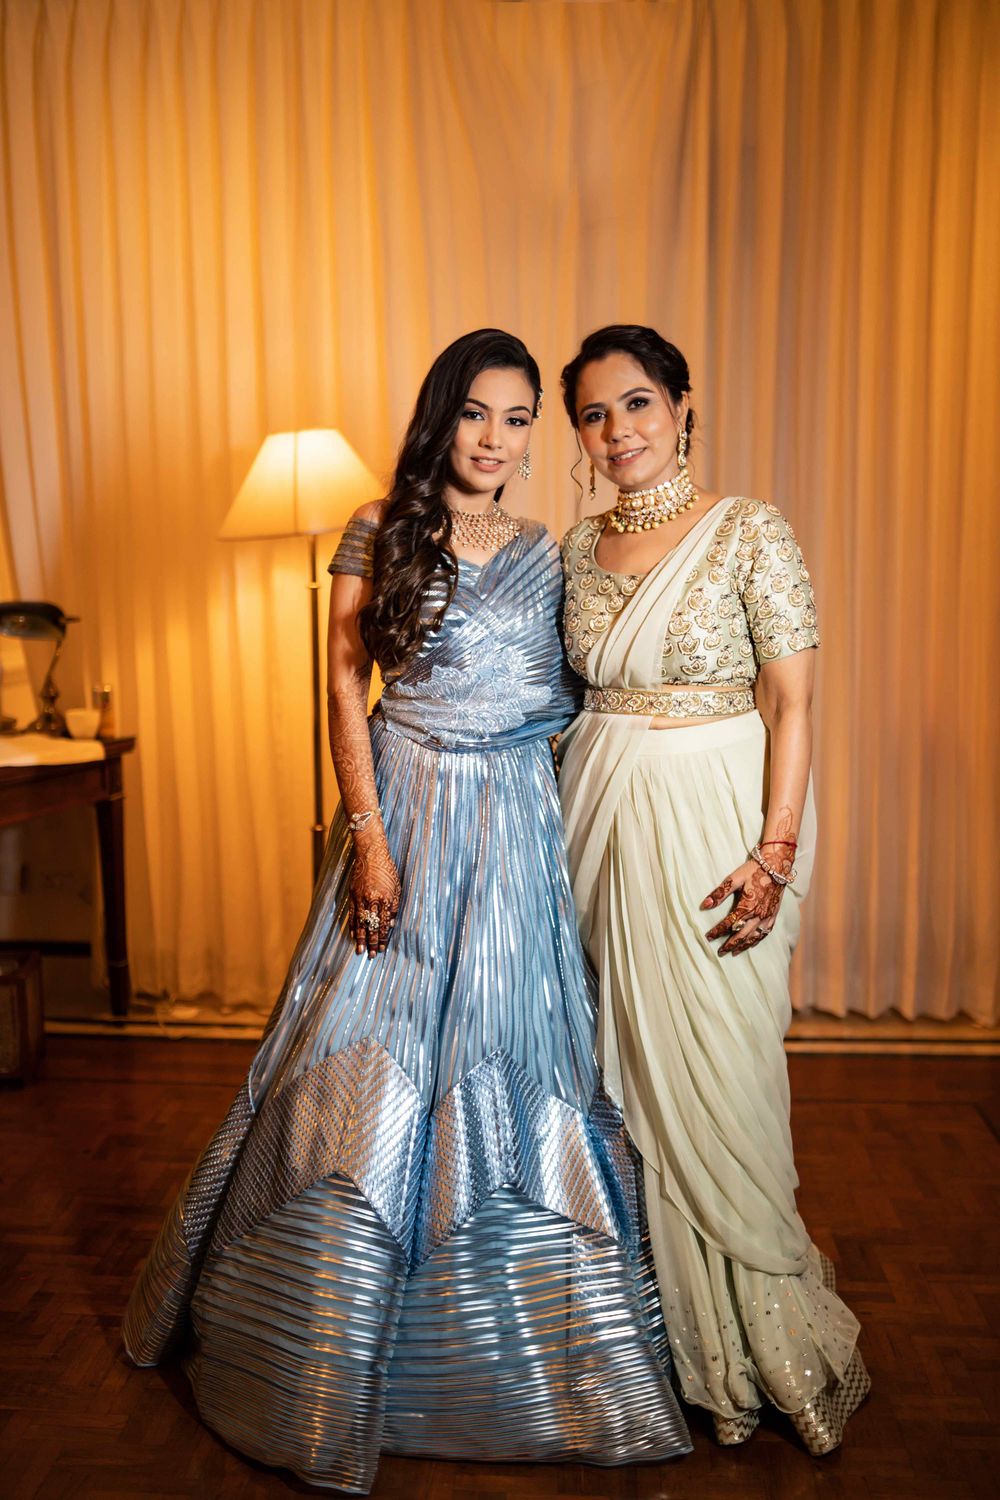 Photo of Bride with her mother on the engagement day